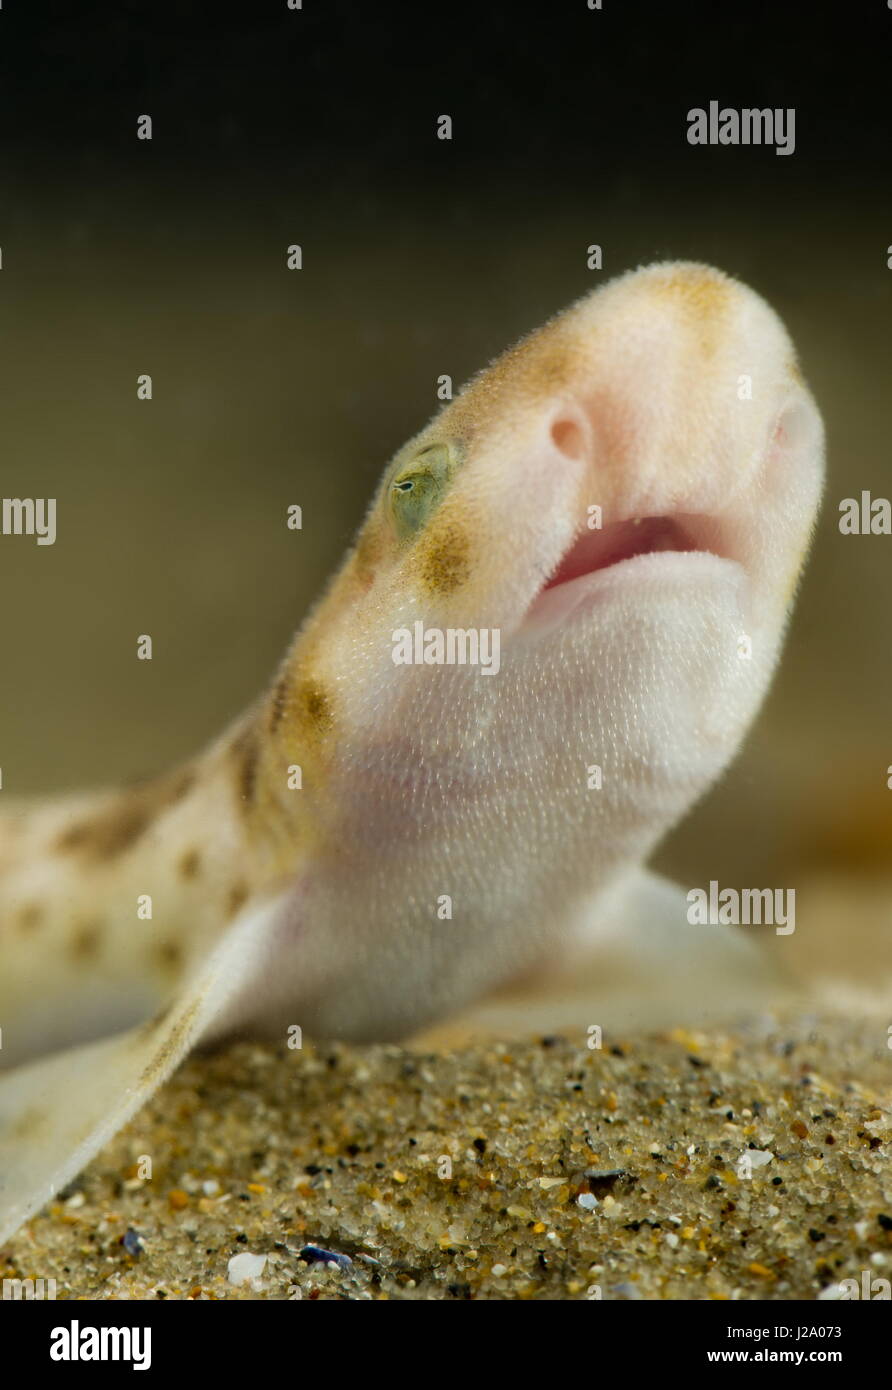 The small-spotted catshark or lesser spotted dogfish, Scyliorhinus canicula, is a cat shark of the family Scyliorhinidae found on the continental shelves and uppermost slopes off Norway and the British Isles south to Senegal, including the Mediterranean between latitudes 63Â° N and 12Â° N. Its length is up to 1 m and it can weigh more than 2 kg Stock Photo